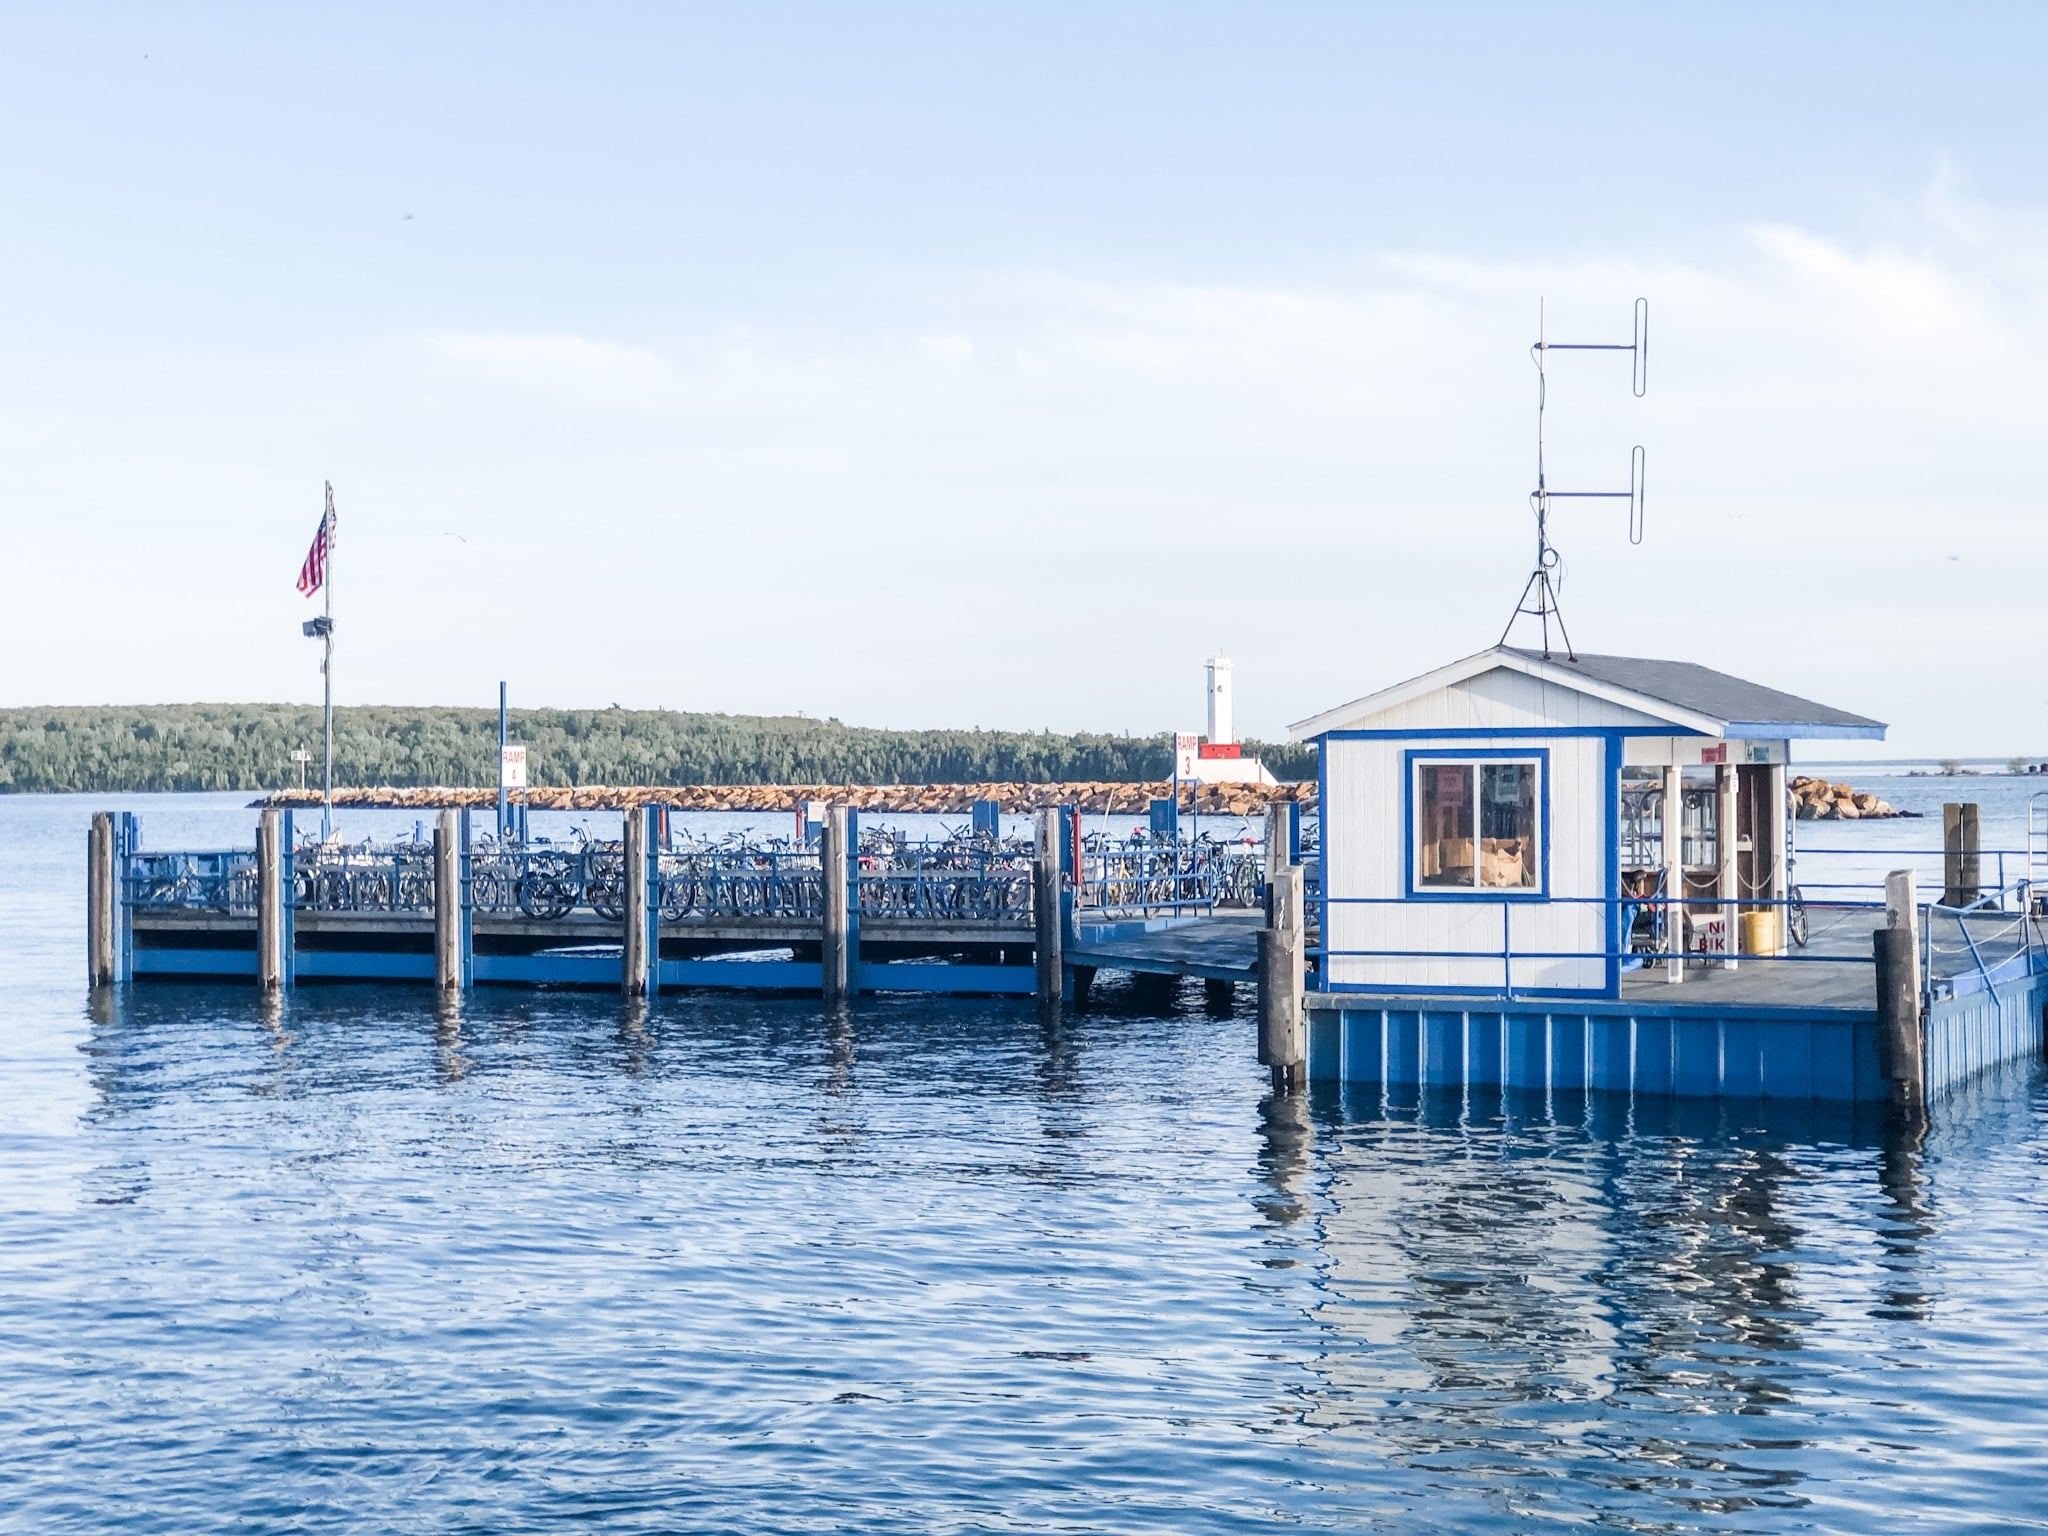 A Mackinac Island Bucket List.  What to see, where to stay, and what to do on Mackinac Island.  Plus, an honest review of Mission Point Resort on Mackinac Island in Northern Michigan.